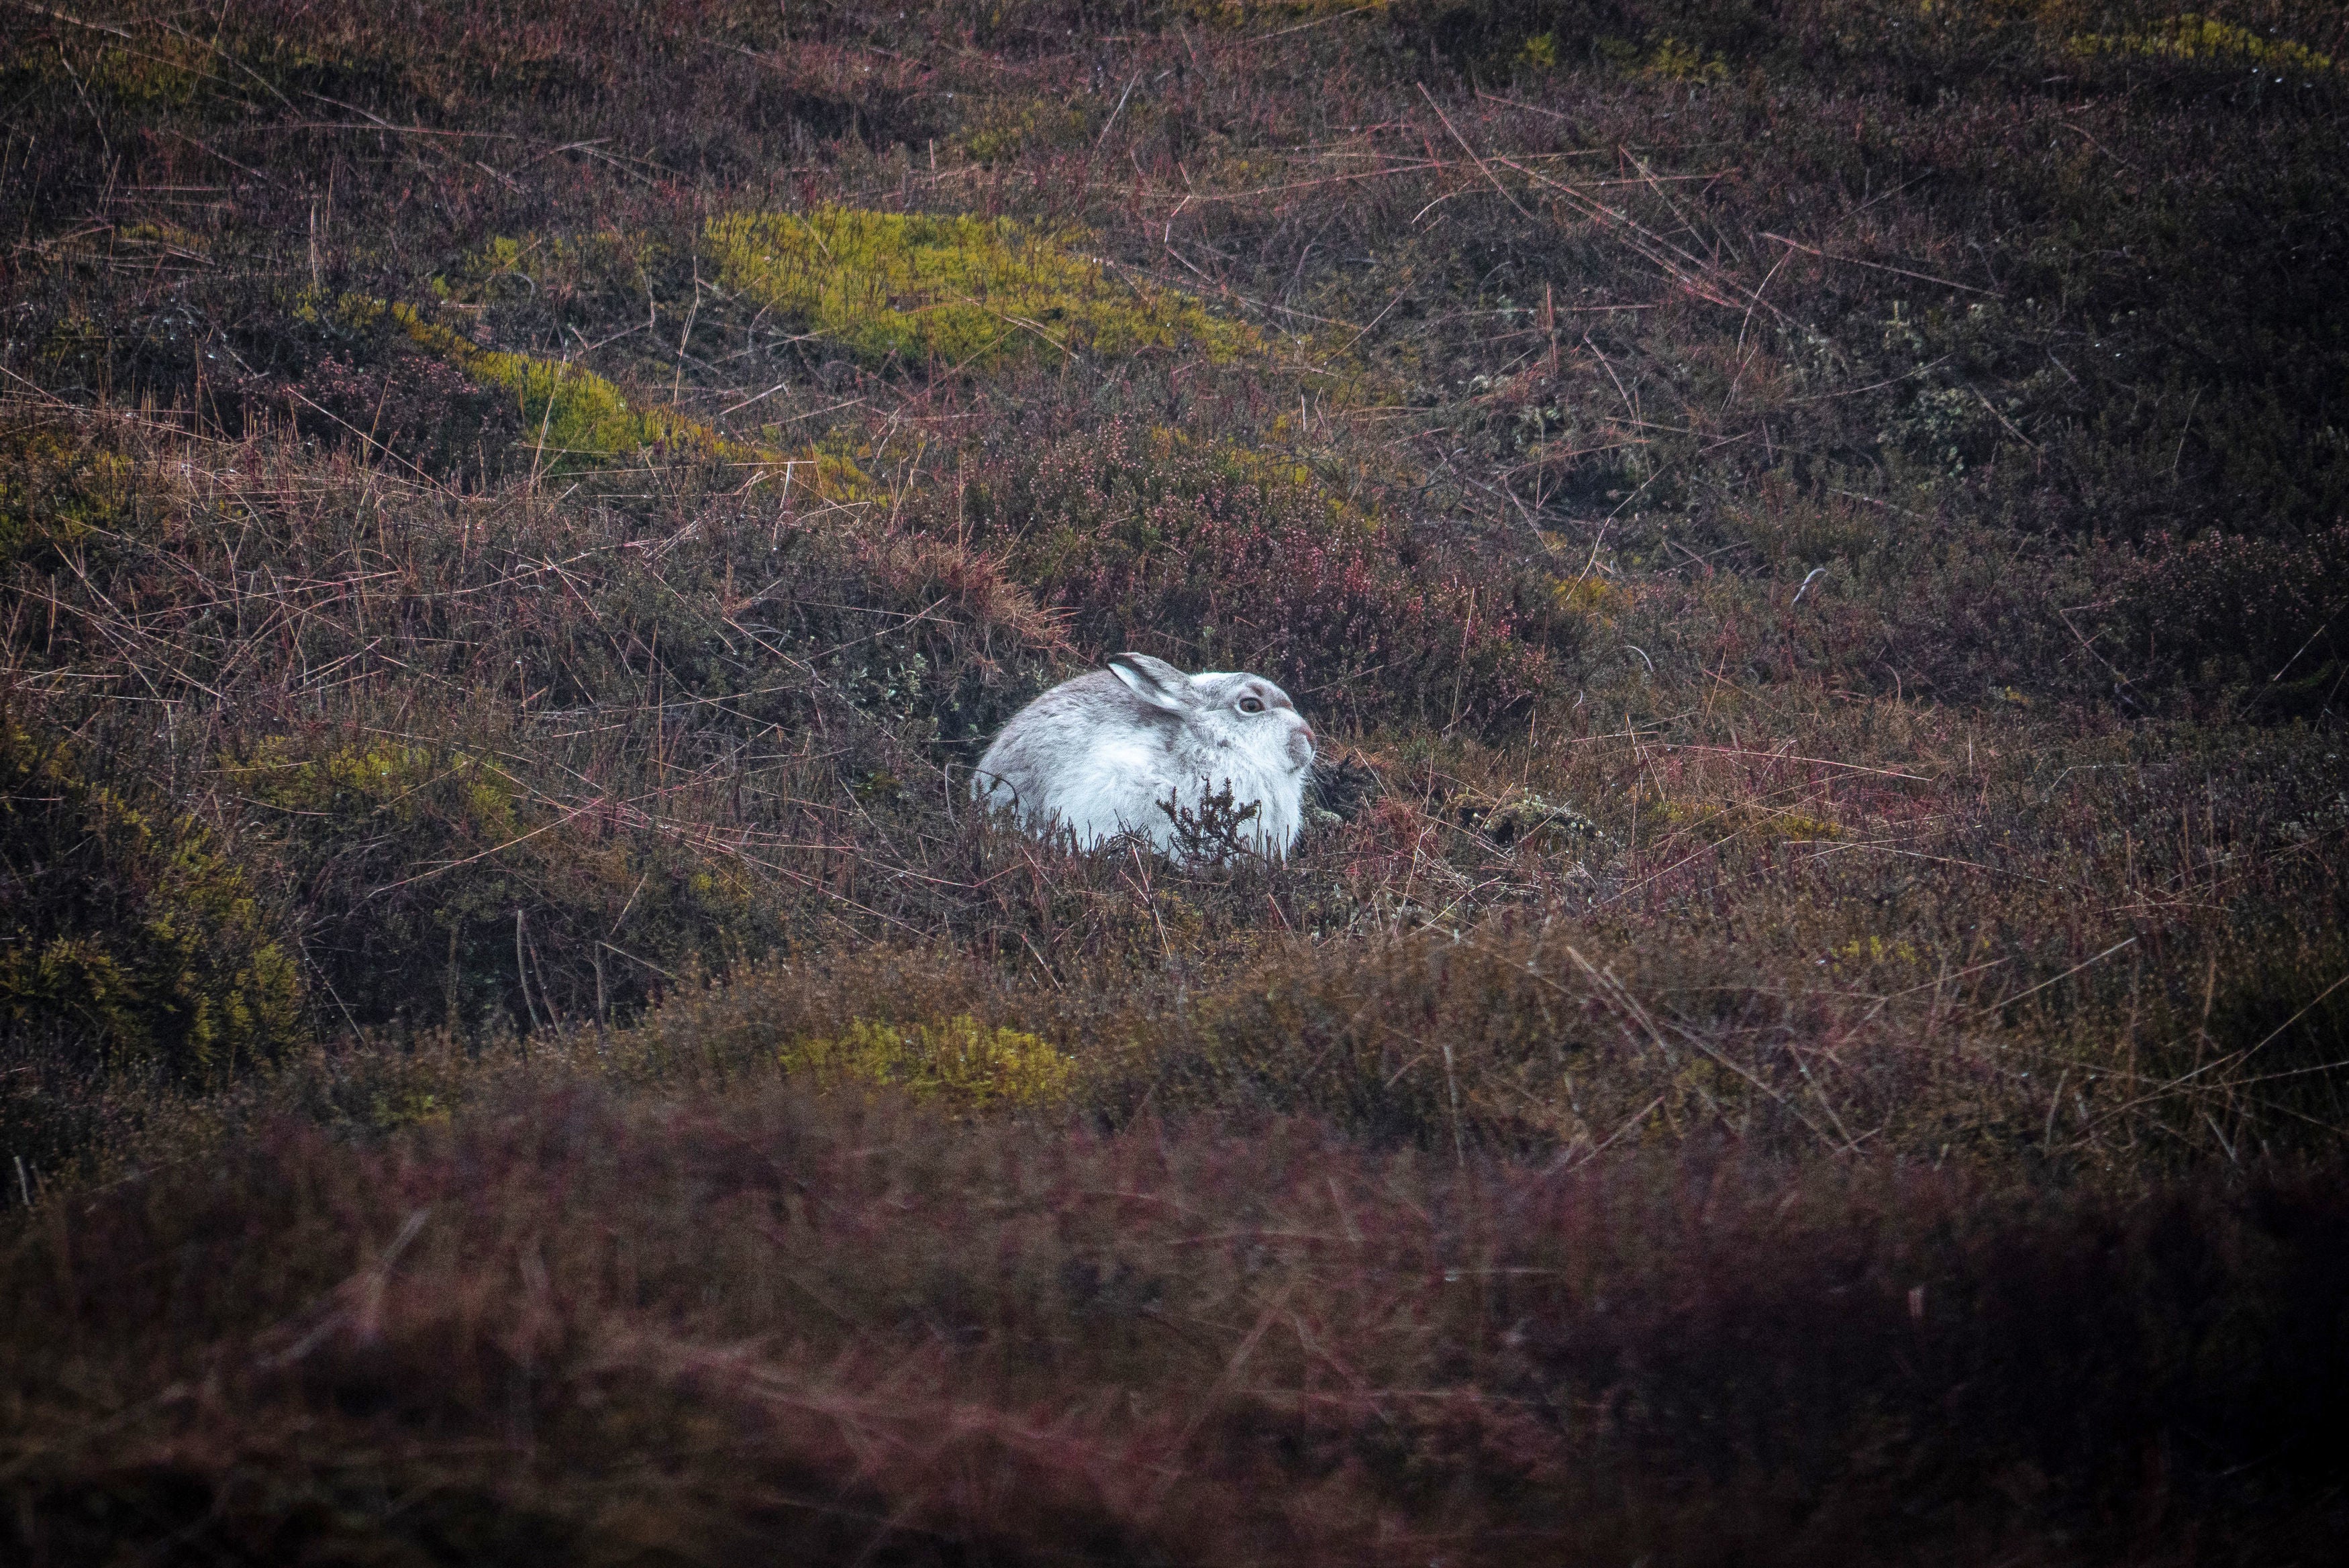 A mountain hare in Woodhead Moor in the Peak District